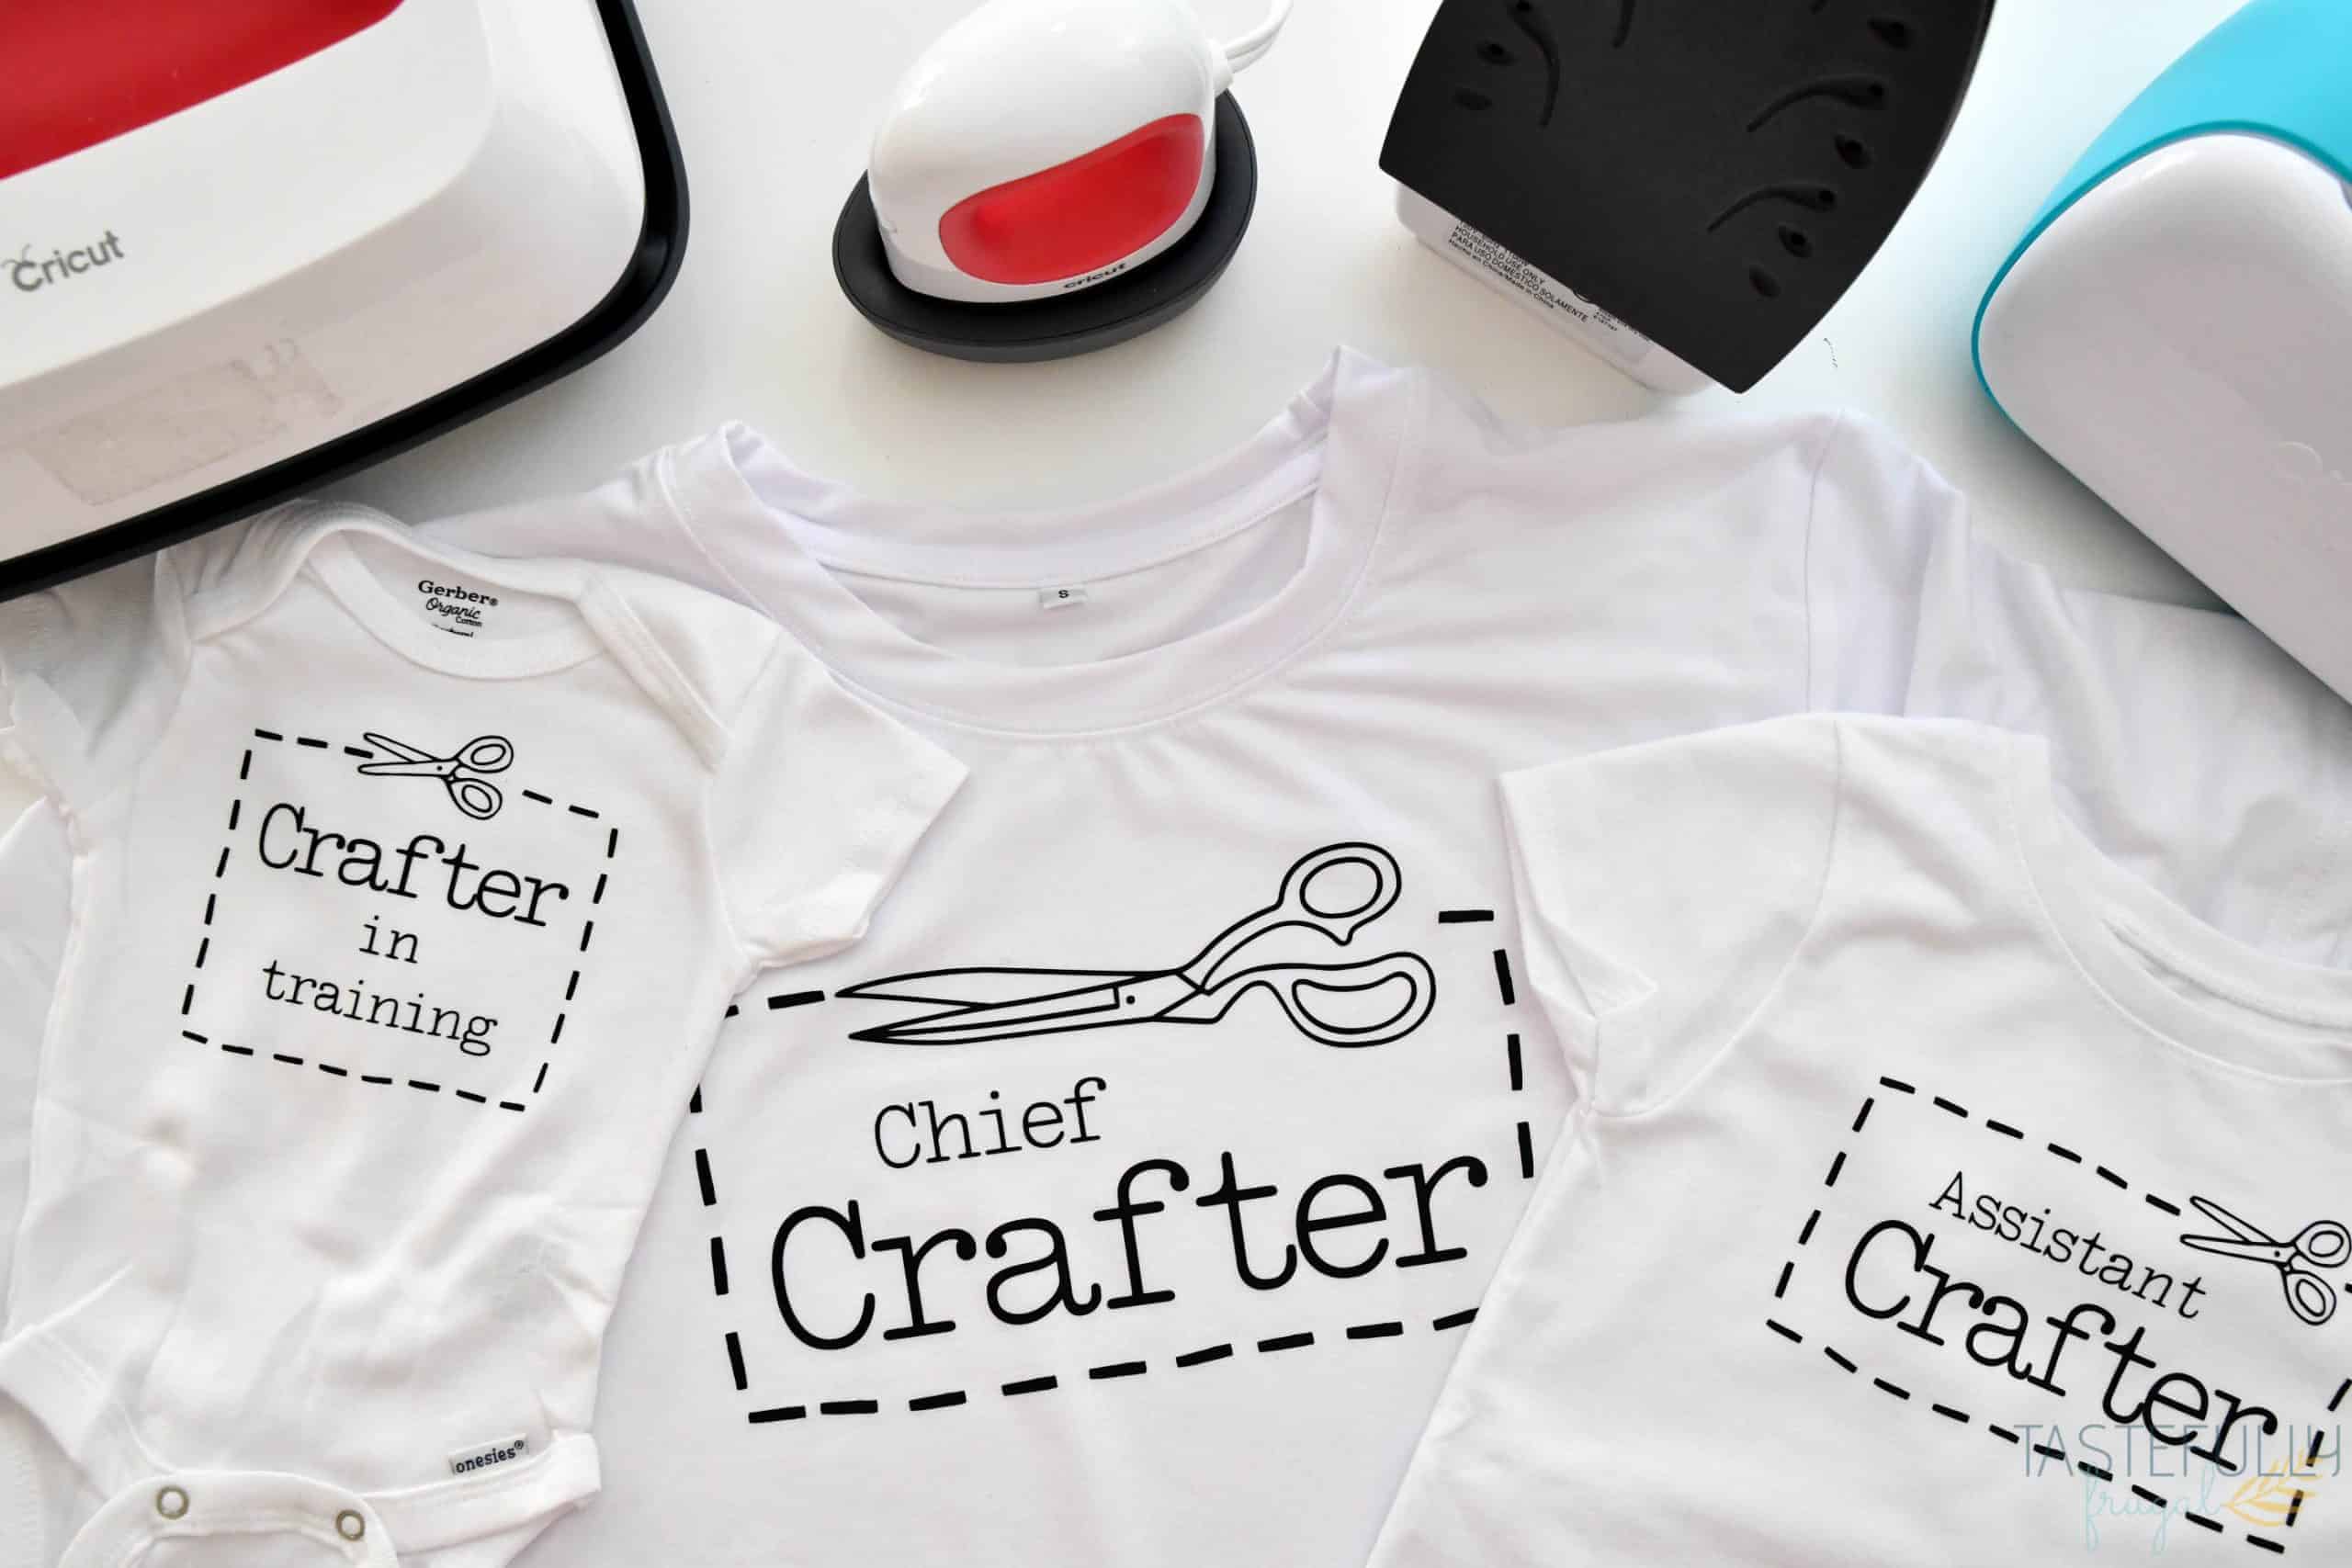 How To Make Shirts With Cricut Joy - Tastefully Frugal